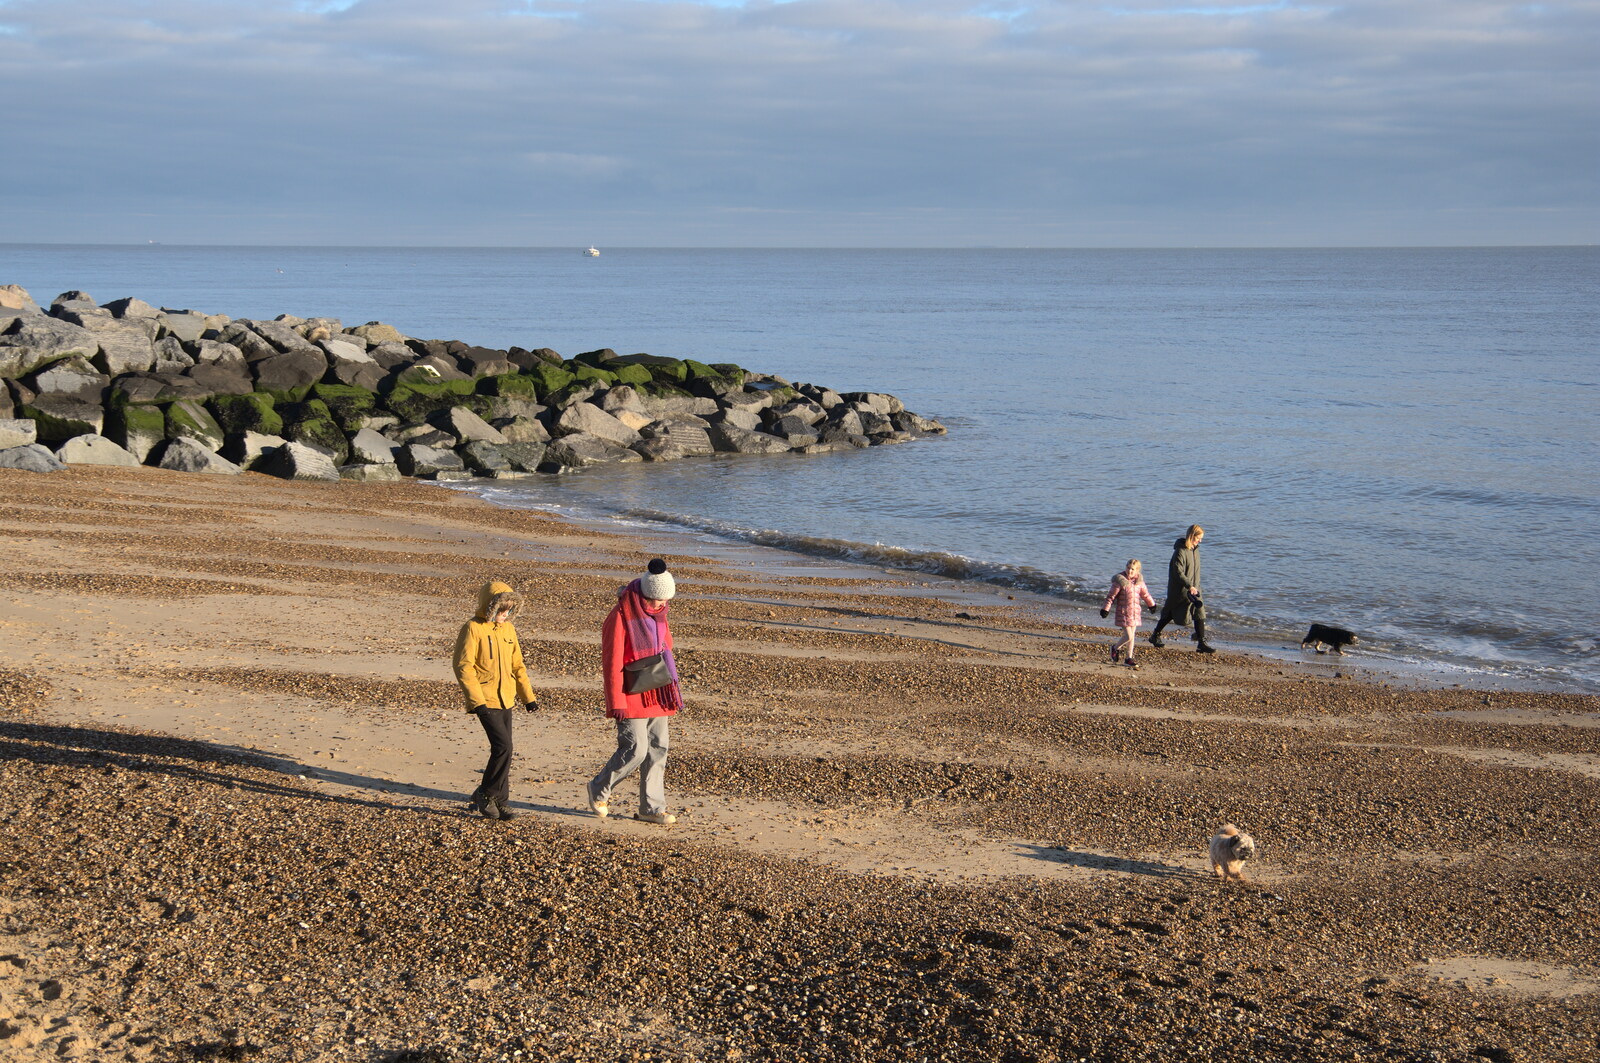 A Short Trip to Felixstowe, Suffolk - 22nd January 2023: Harry and Isobel are on the beach